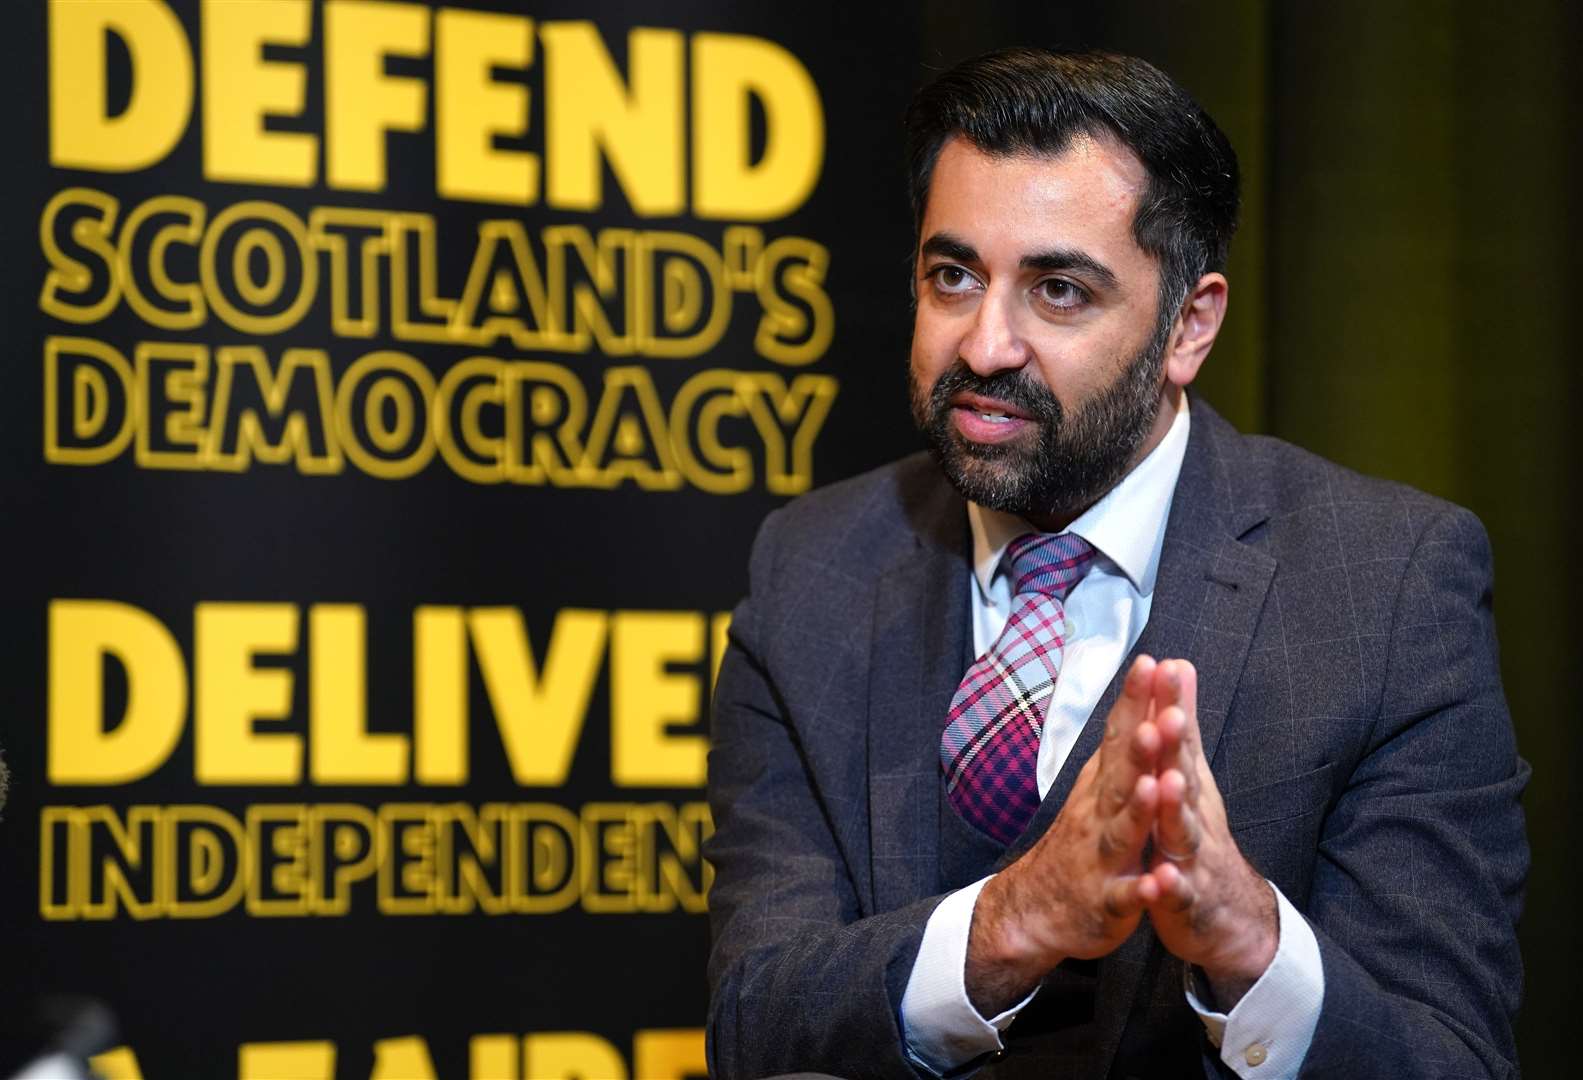 SNP leadership candidate Humza Yousaf (Andrew Milligan/PA)